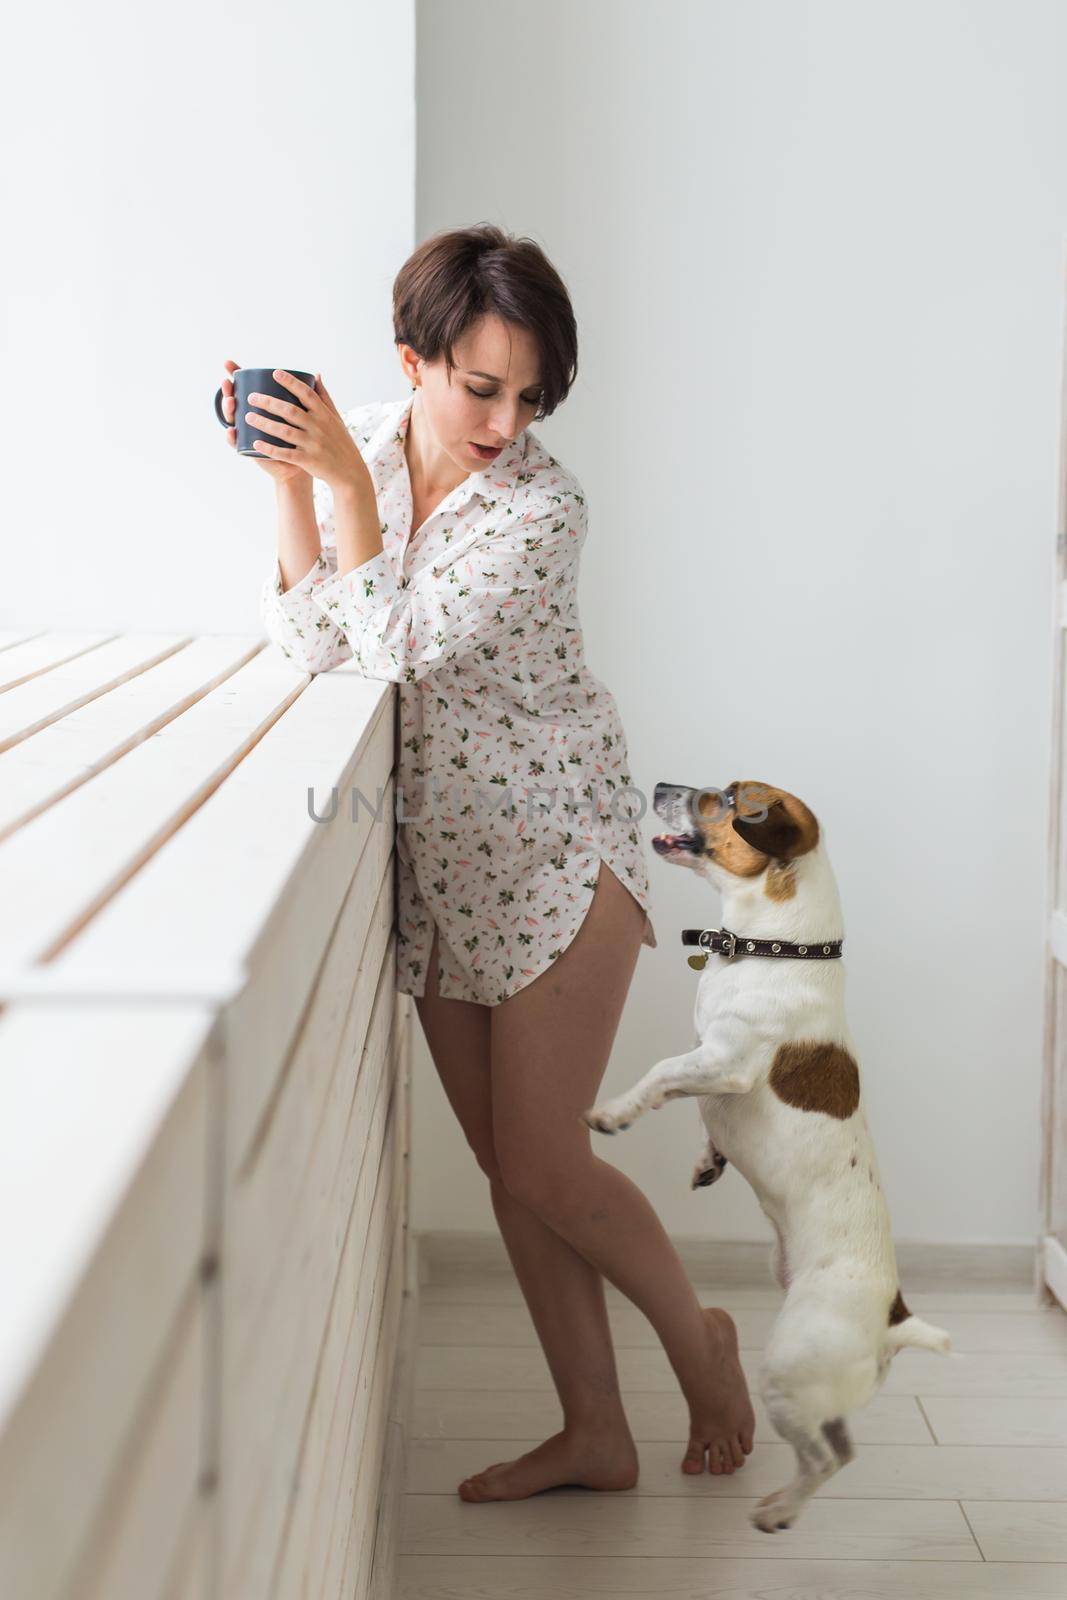 Woman wearing cozy home shirt relaxing at home and playing with dog jack Russell terrier, drinking tea. Morning concept